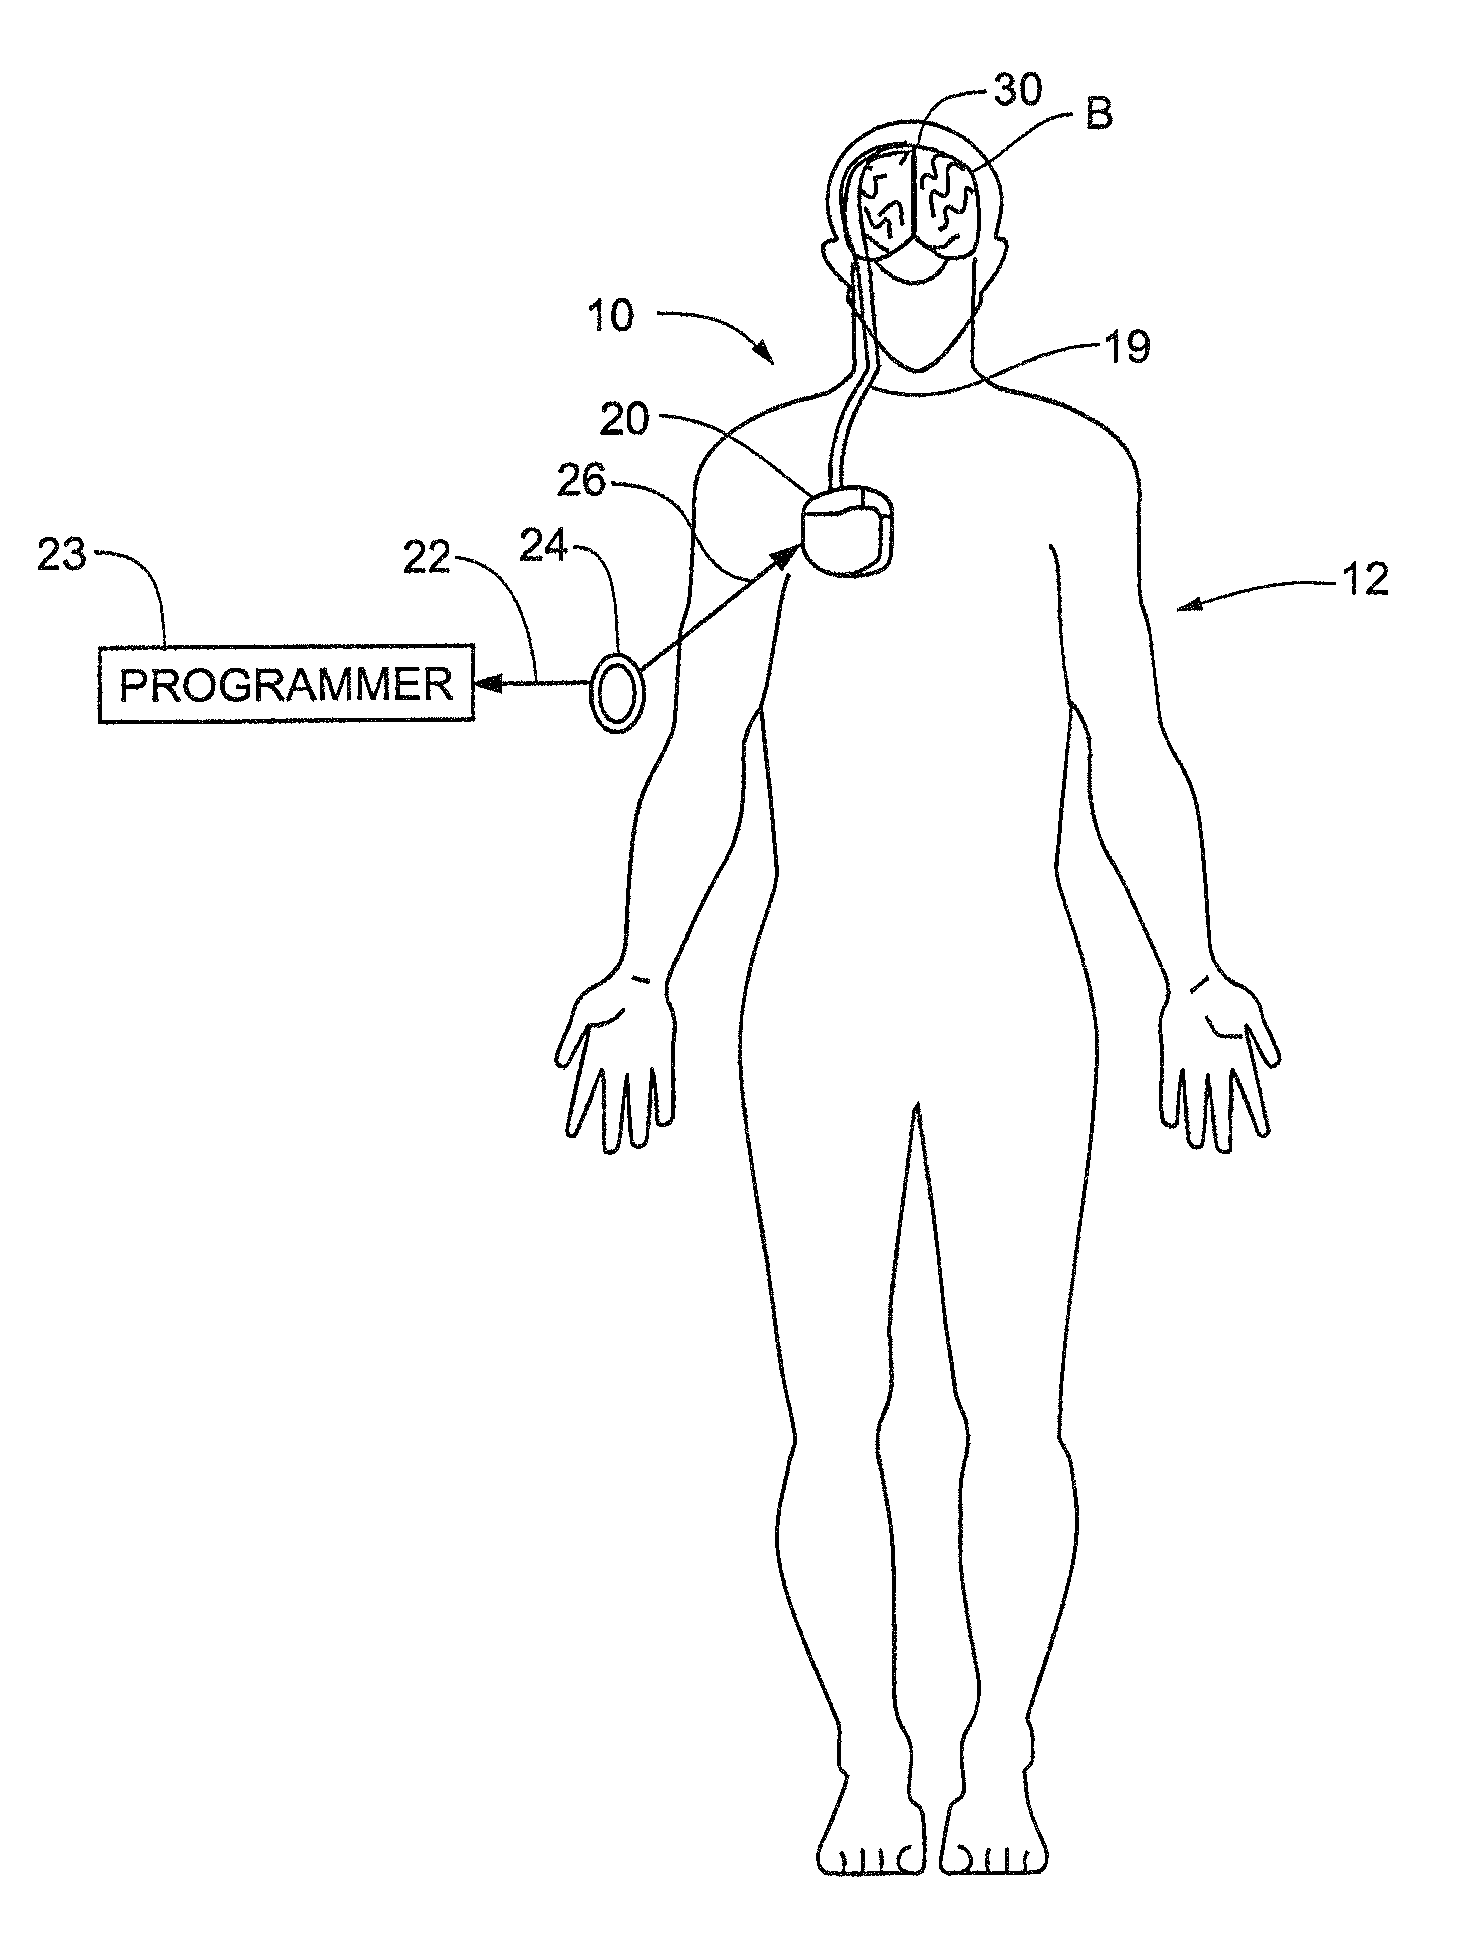 Method and apparatus for the treatment of movement disorders